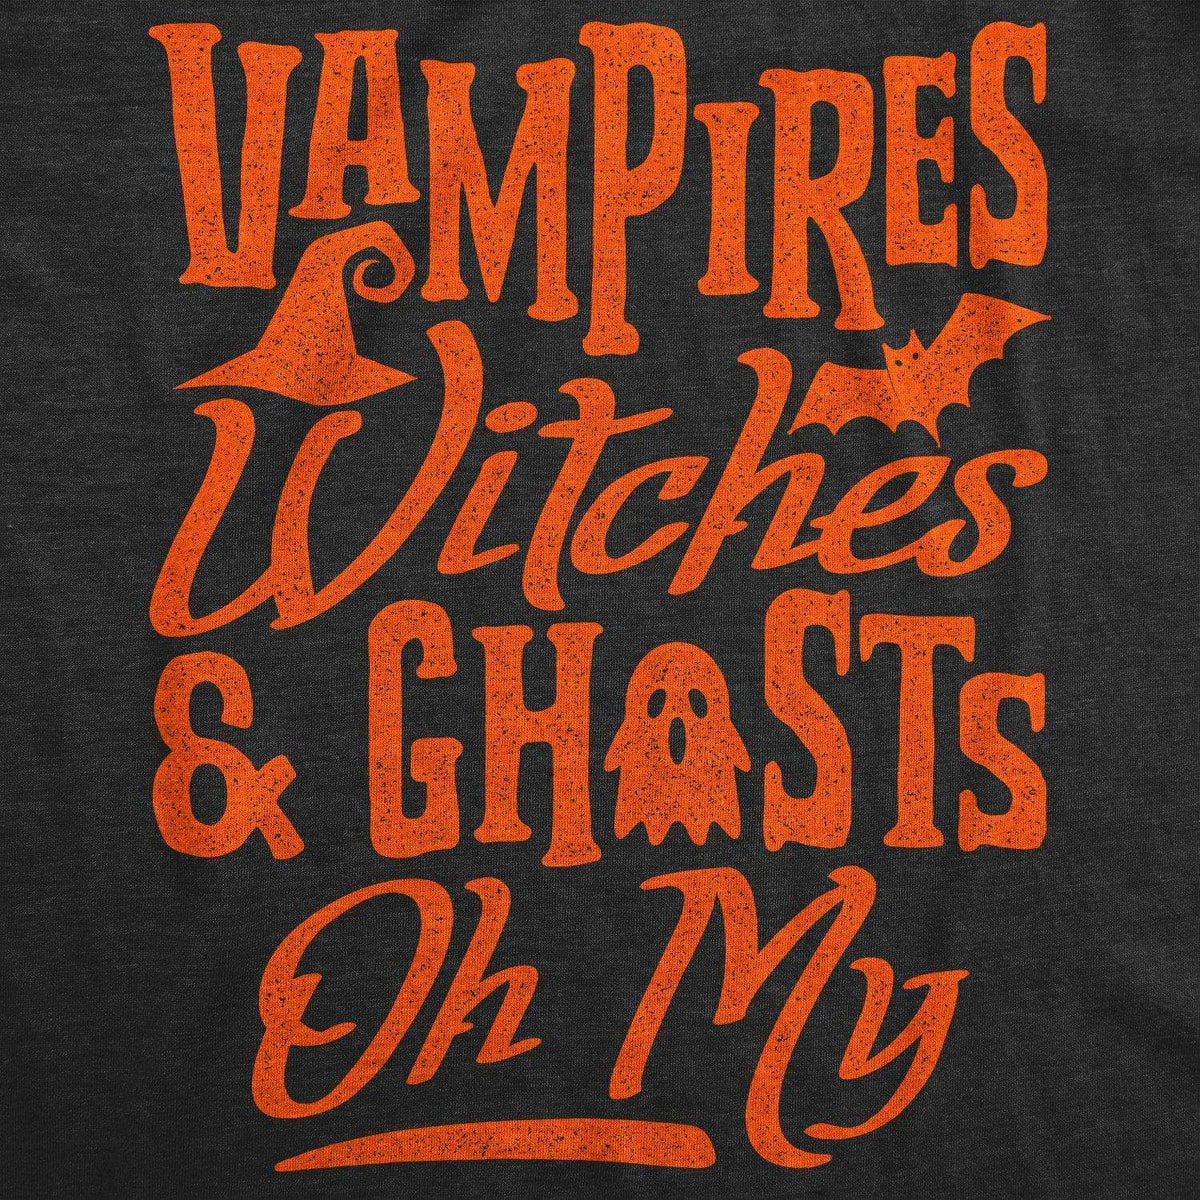 Vampires Witches And Ghouls Women&#39;s Tshirt - Crazy Dog T-Shirts